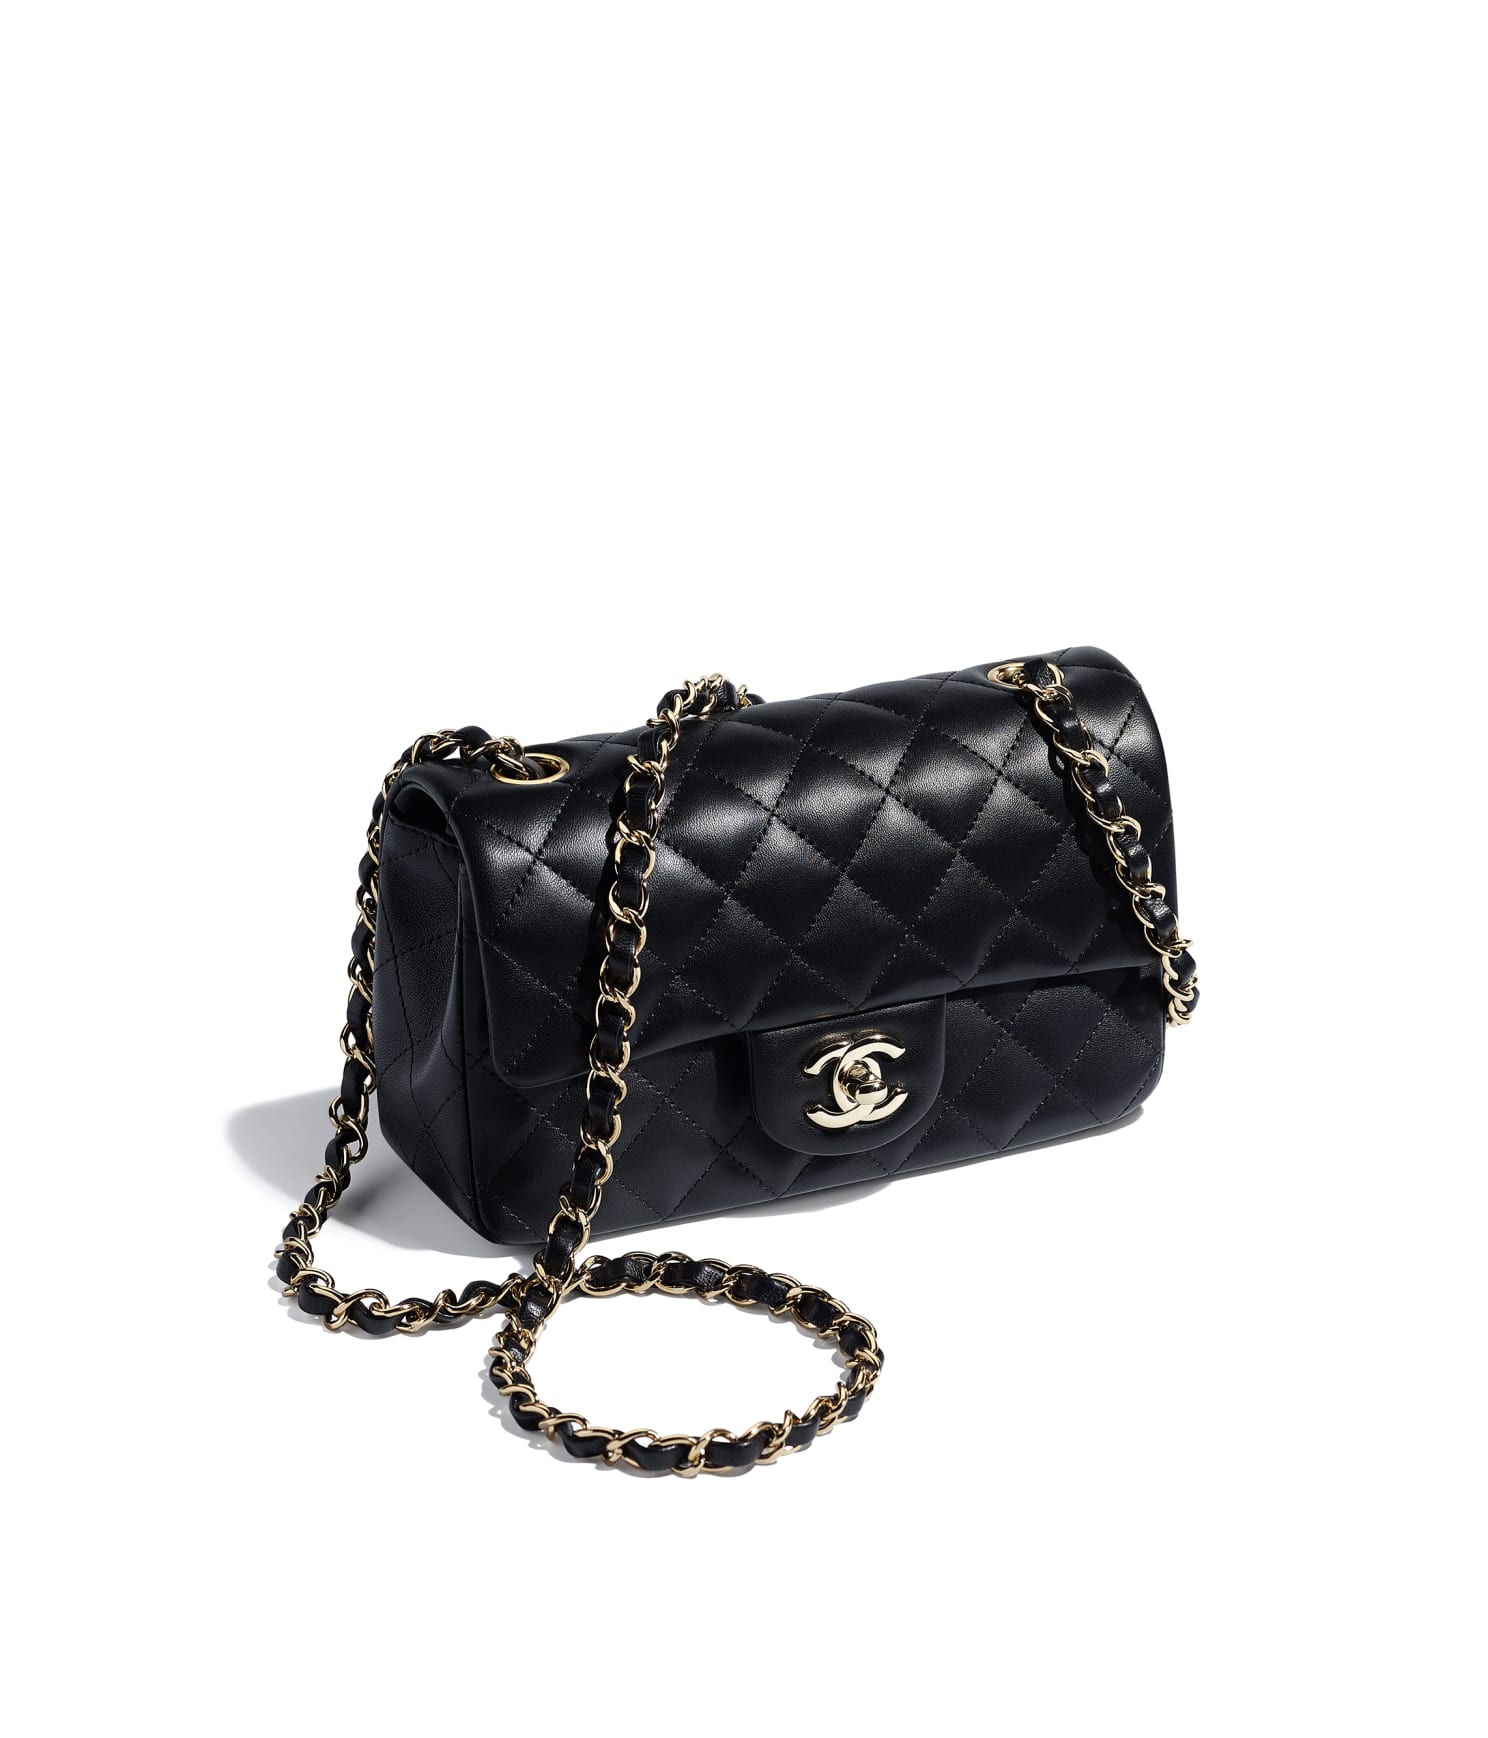 Chanel 19 Bag Review  Is it Worth it  FROM LUXE WITH LOVE